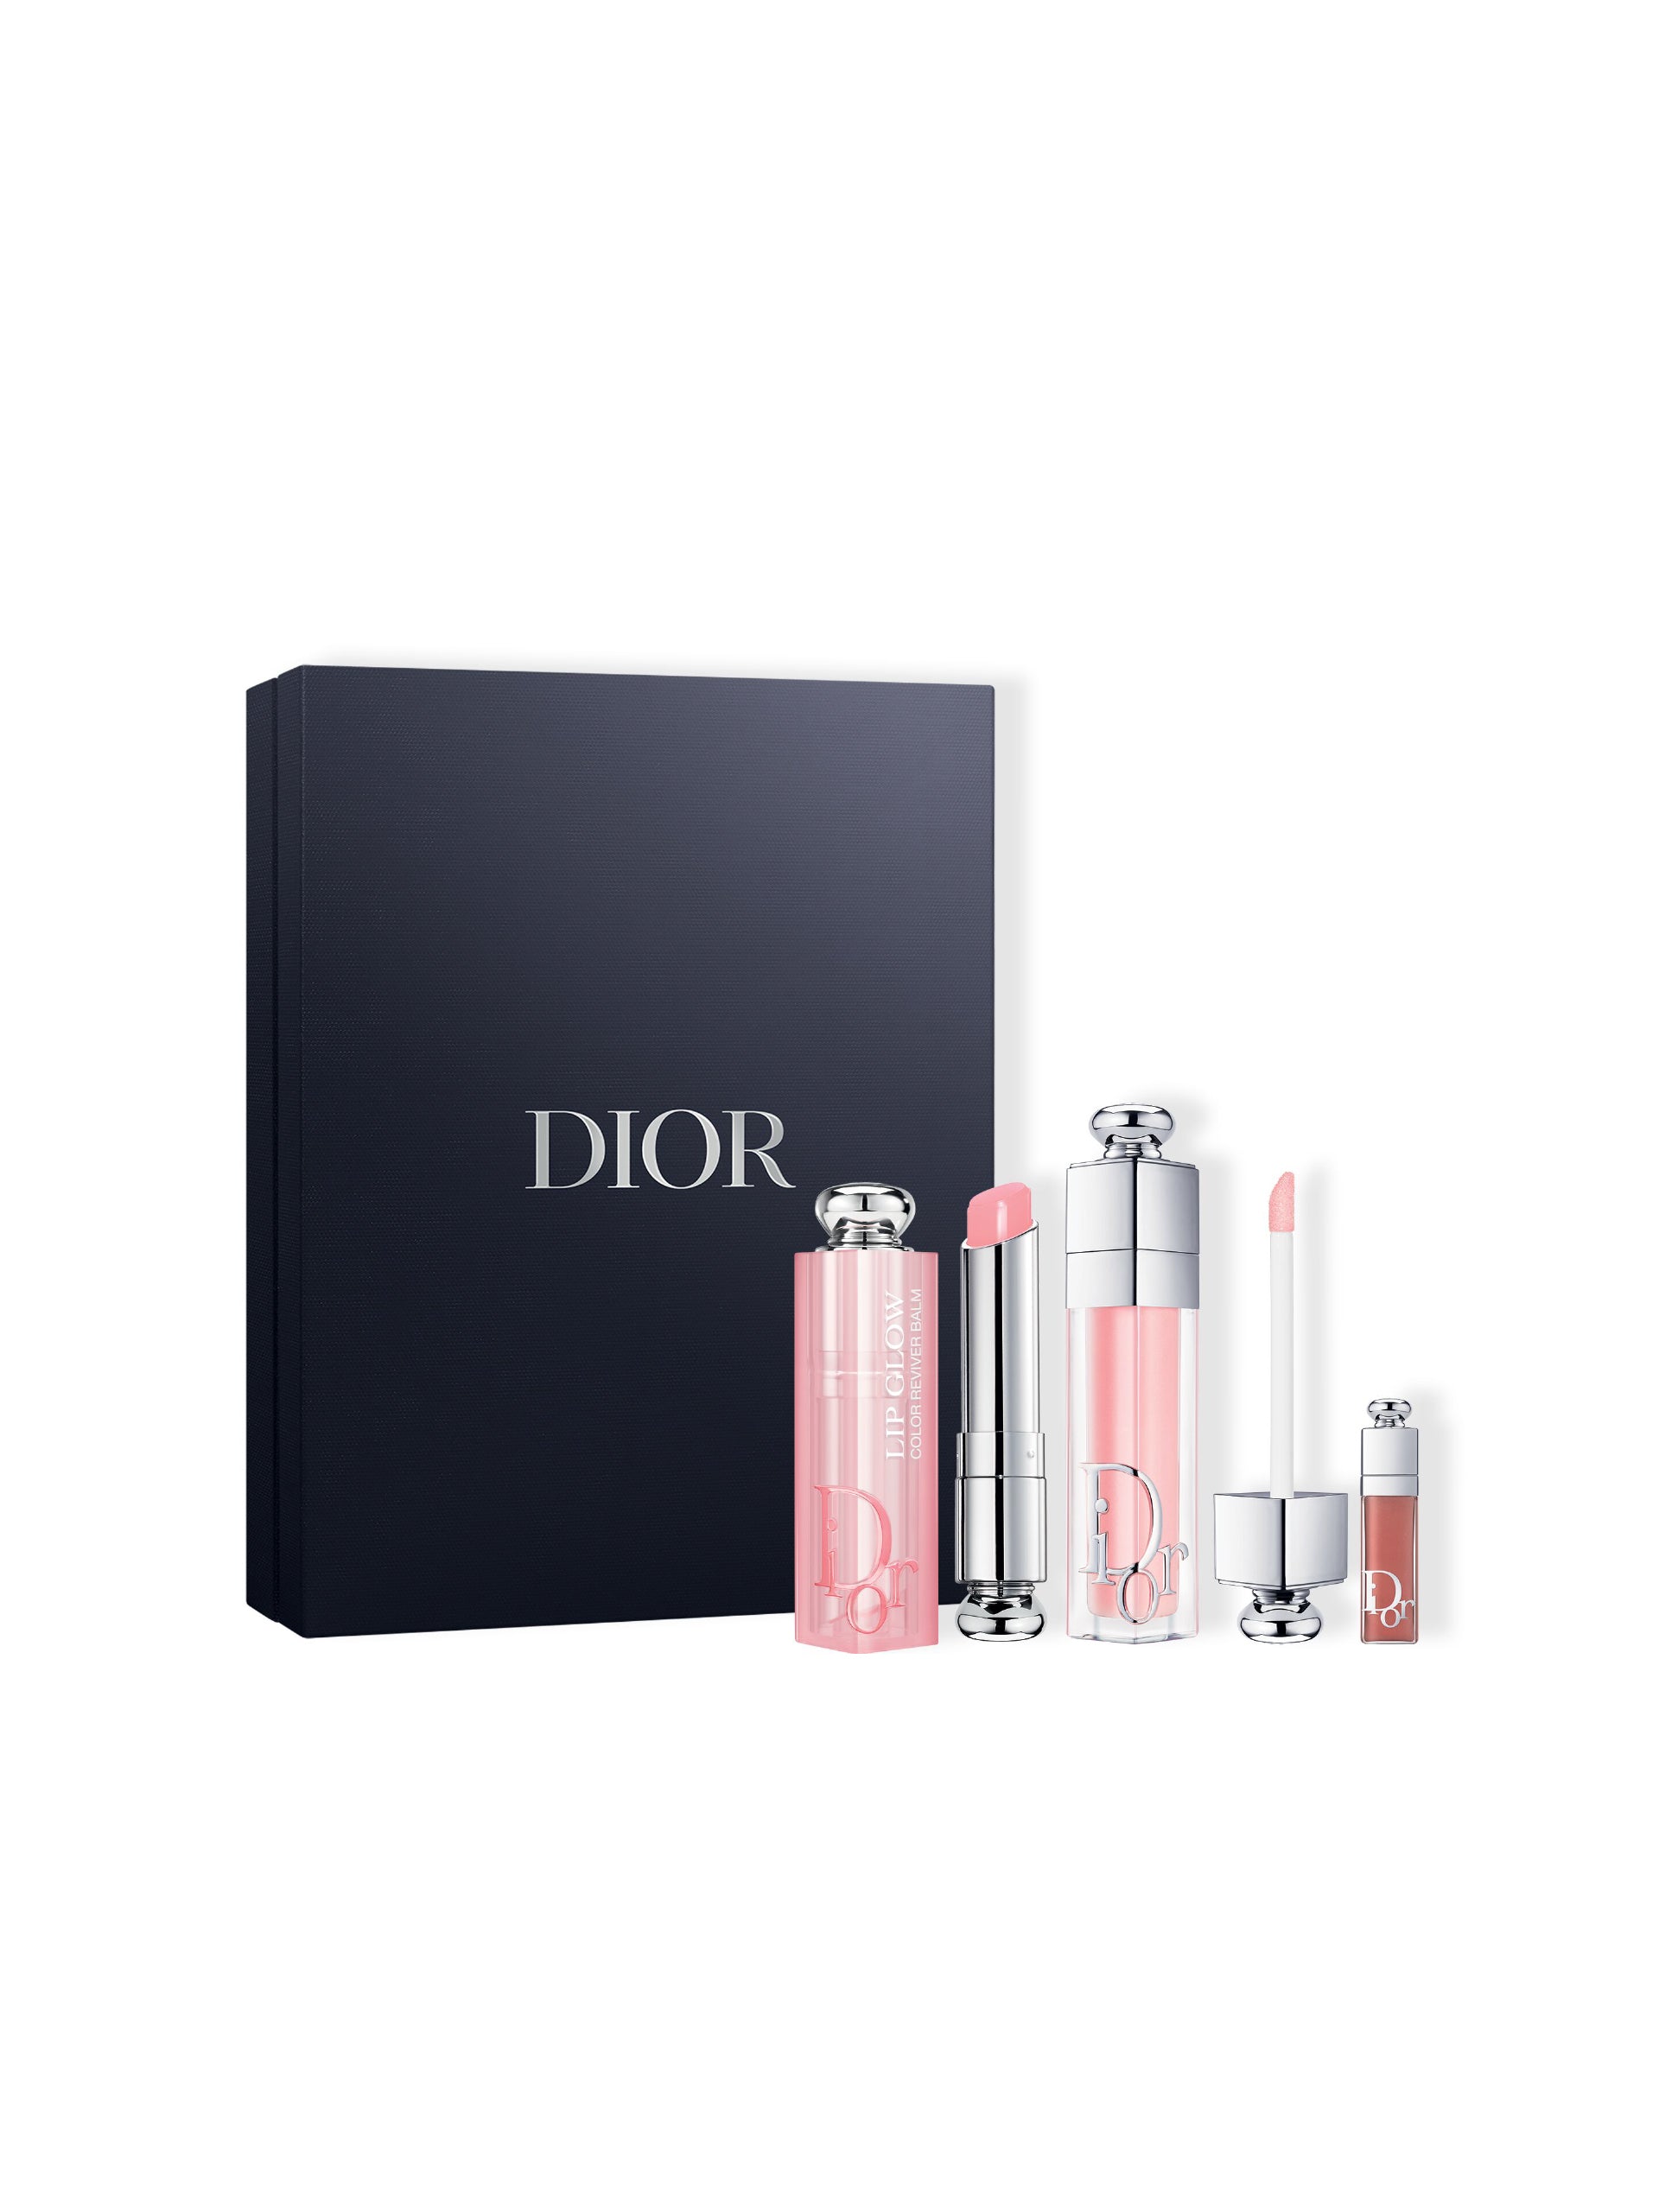 Dior Addict 3 Pink Set lip Plumping - ae – products balm 001 and Product Makeup gloss